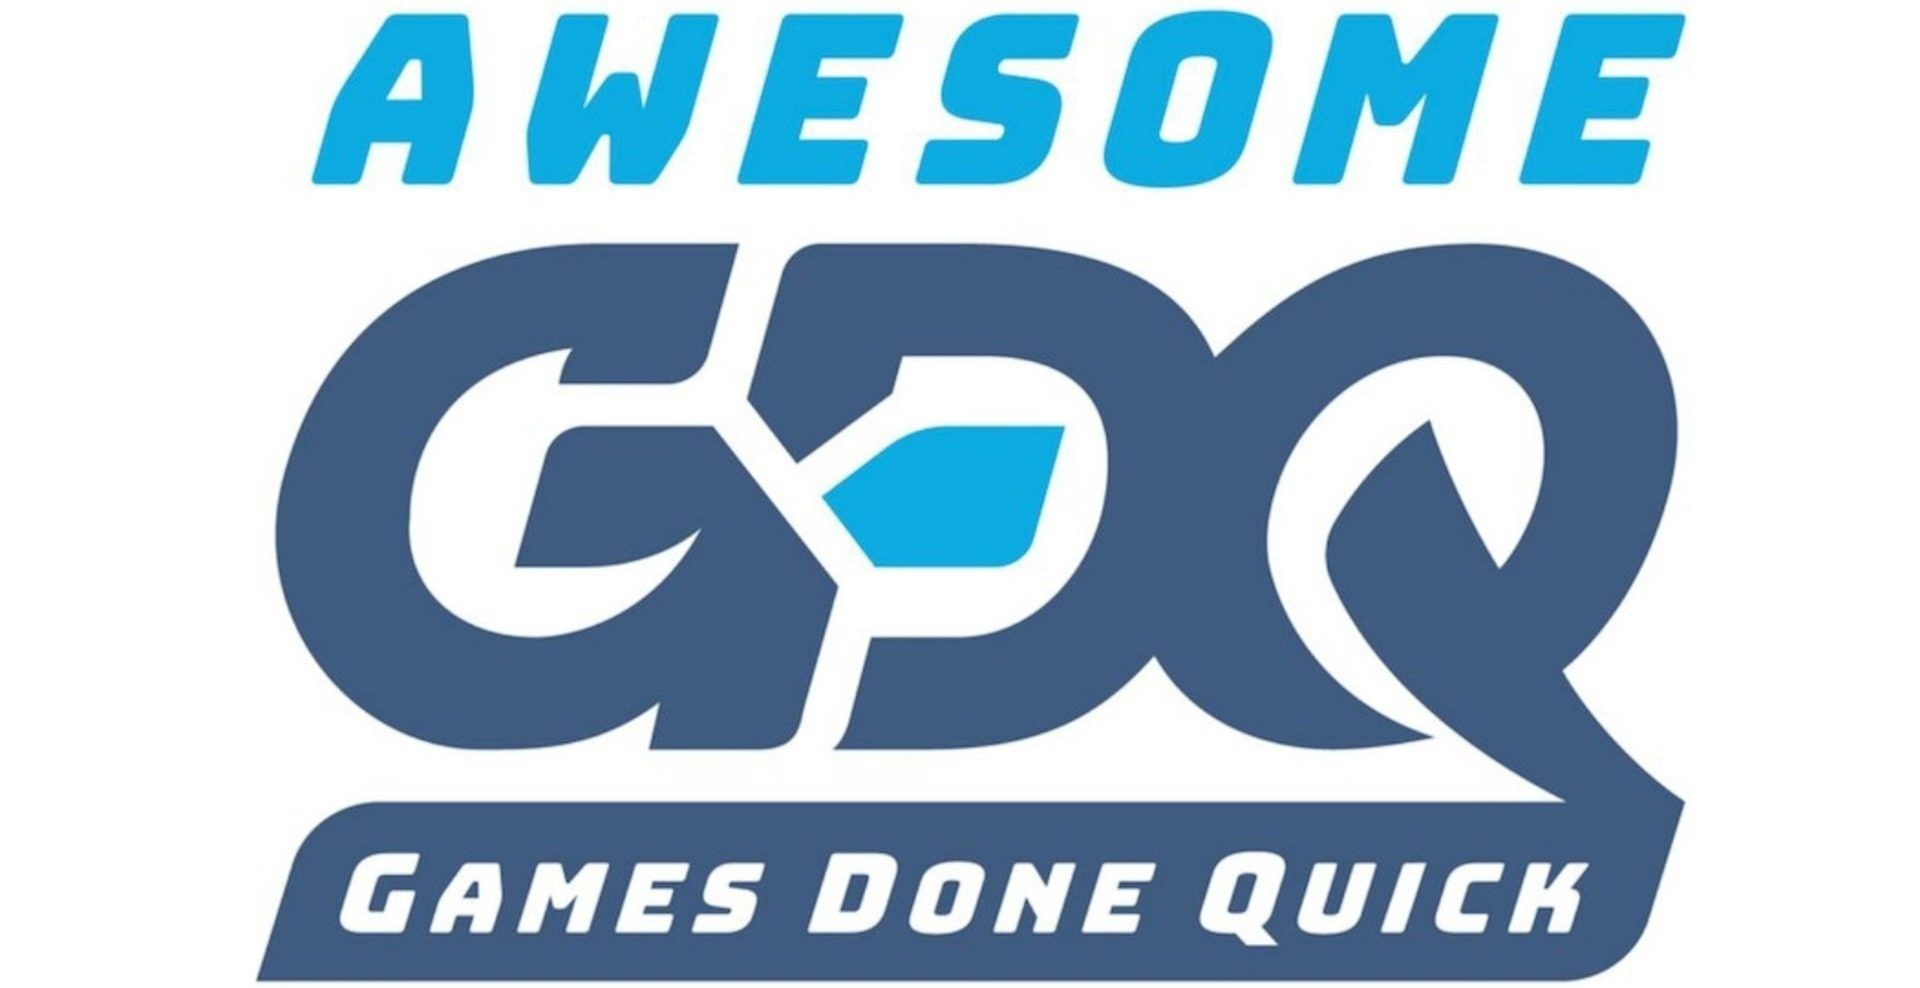 Blue text that reads "Awesome GDQ Games Done Quick"